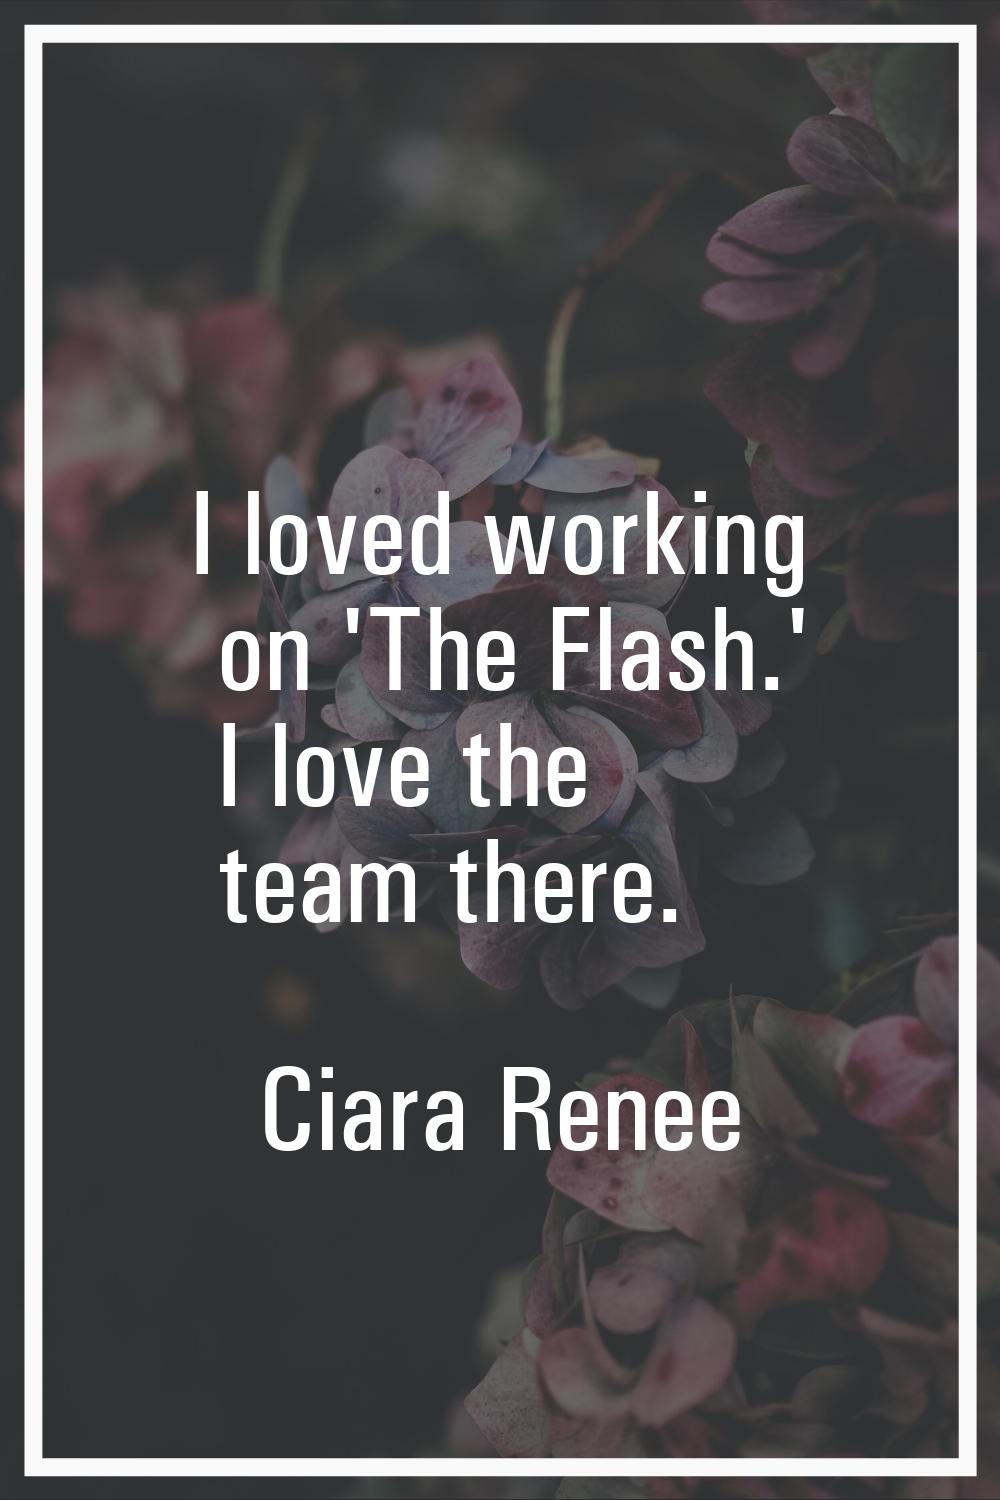 I loved working on 'The Flash.' I love the team there.